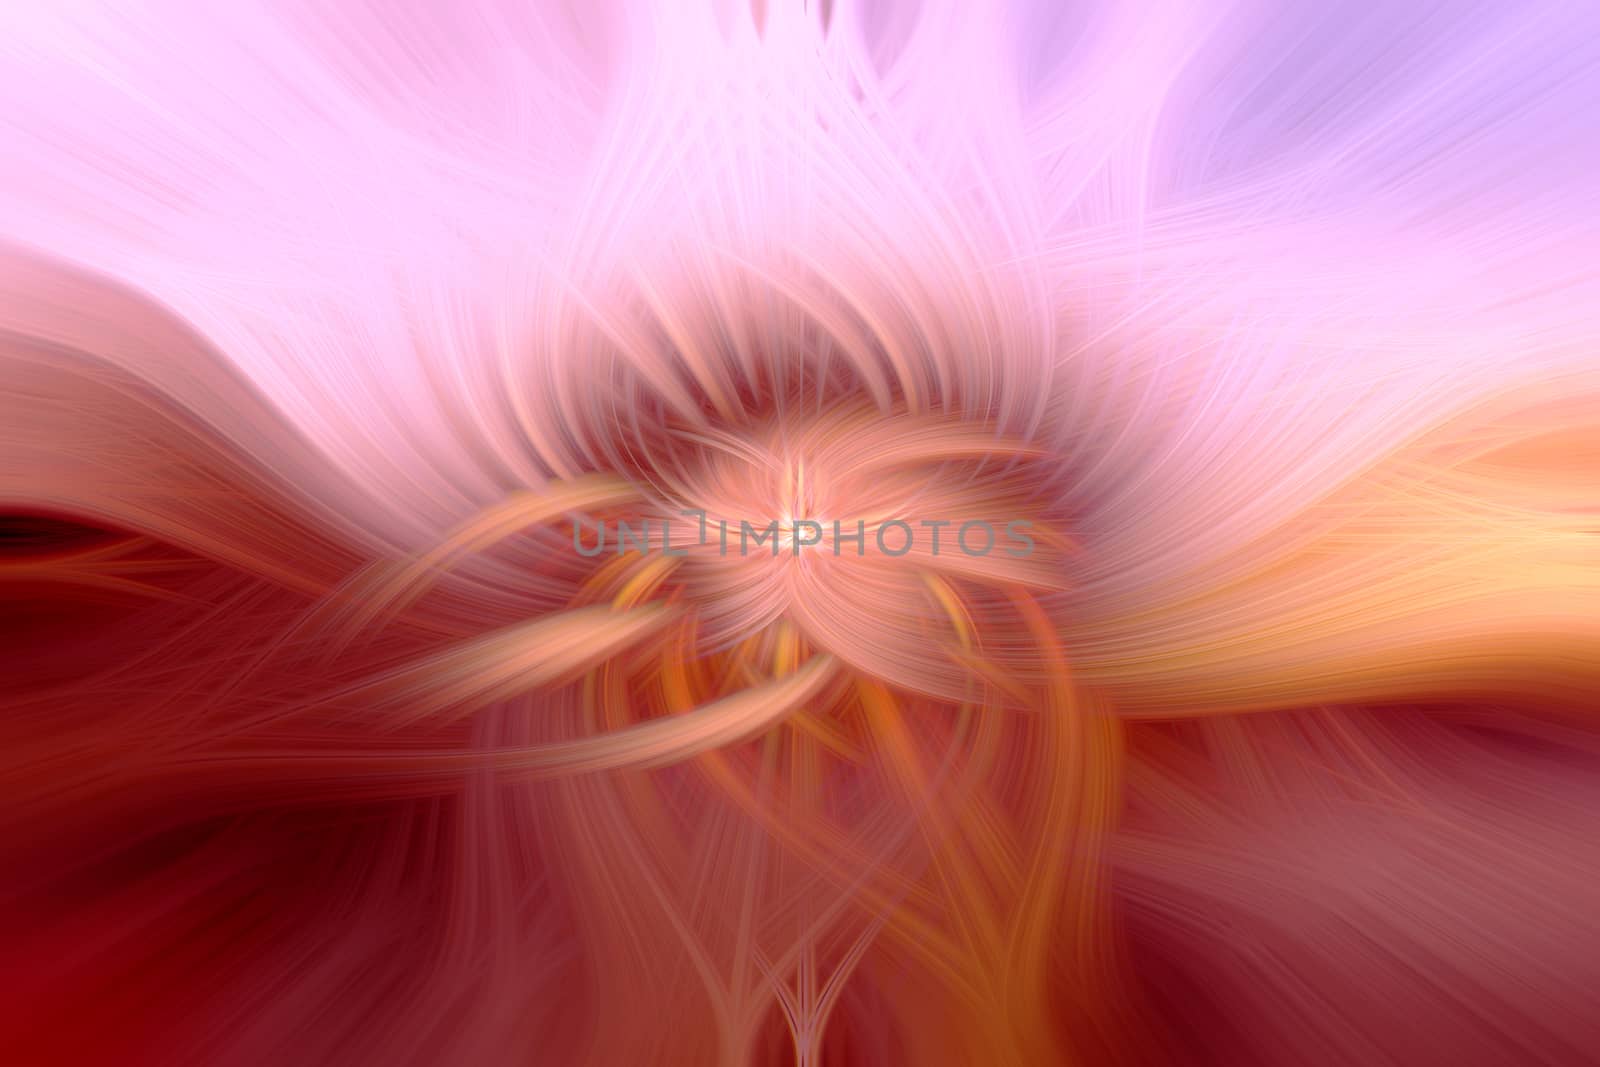 Beautiful abstract intertwined 3d fibers forming an ornament out of various symmetrical shapes. Purple, pink, and orange colors. Illustration.